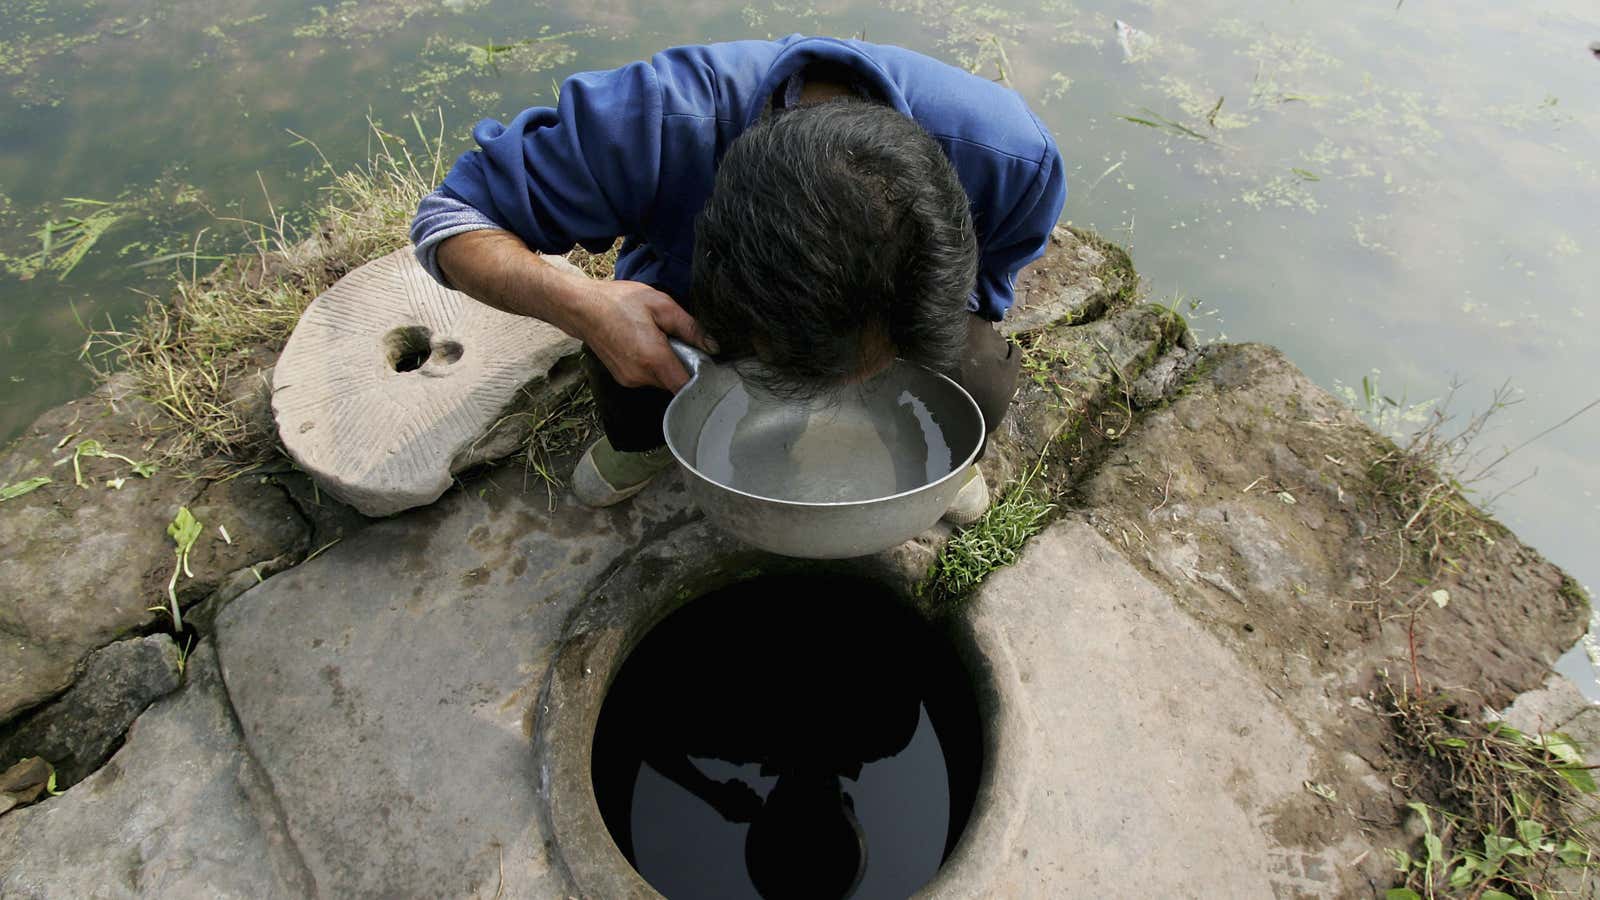 Water in this village near Chongqing probably caused 14 out of 500 villagers to die of cancer in just three years.